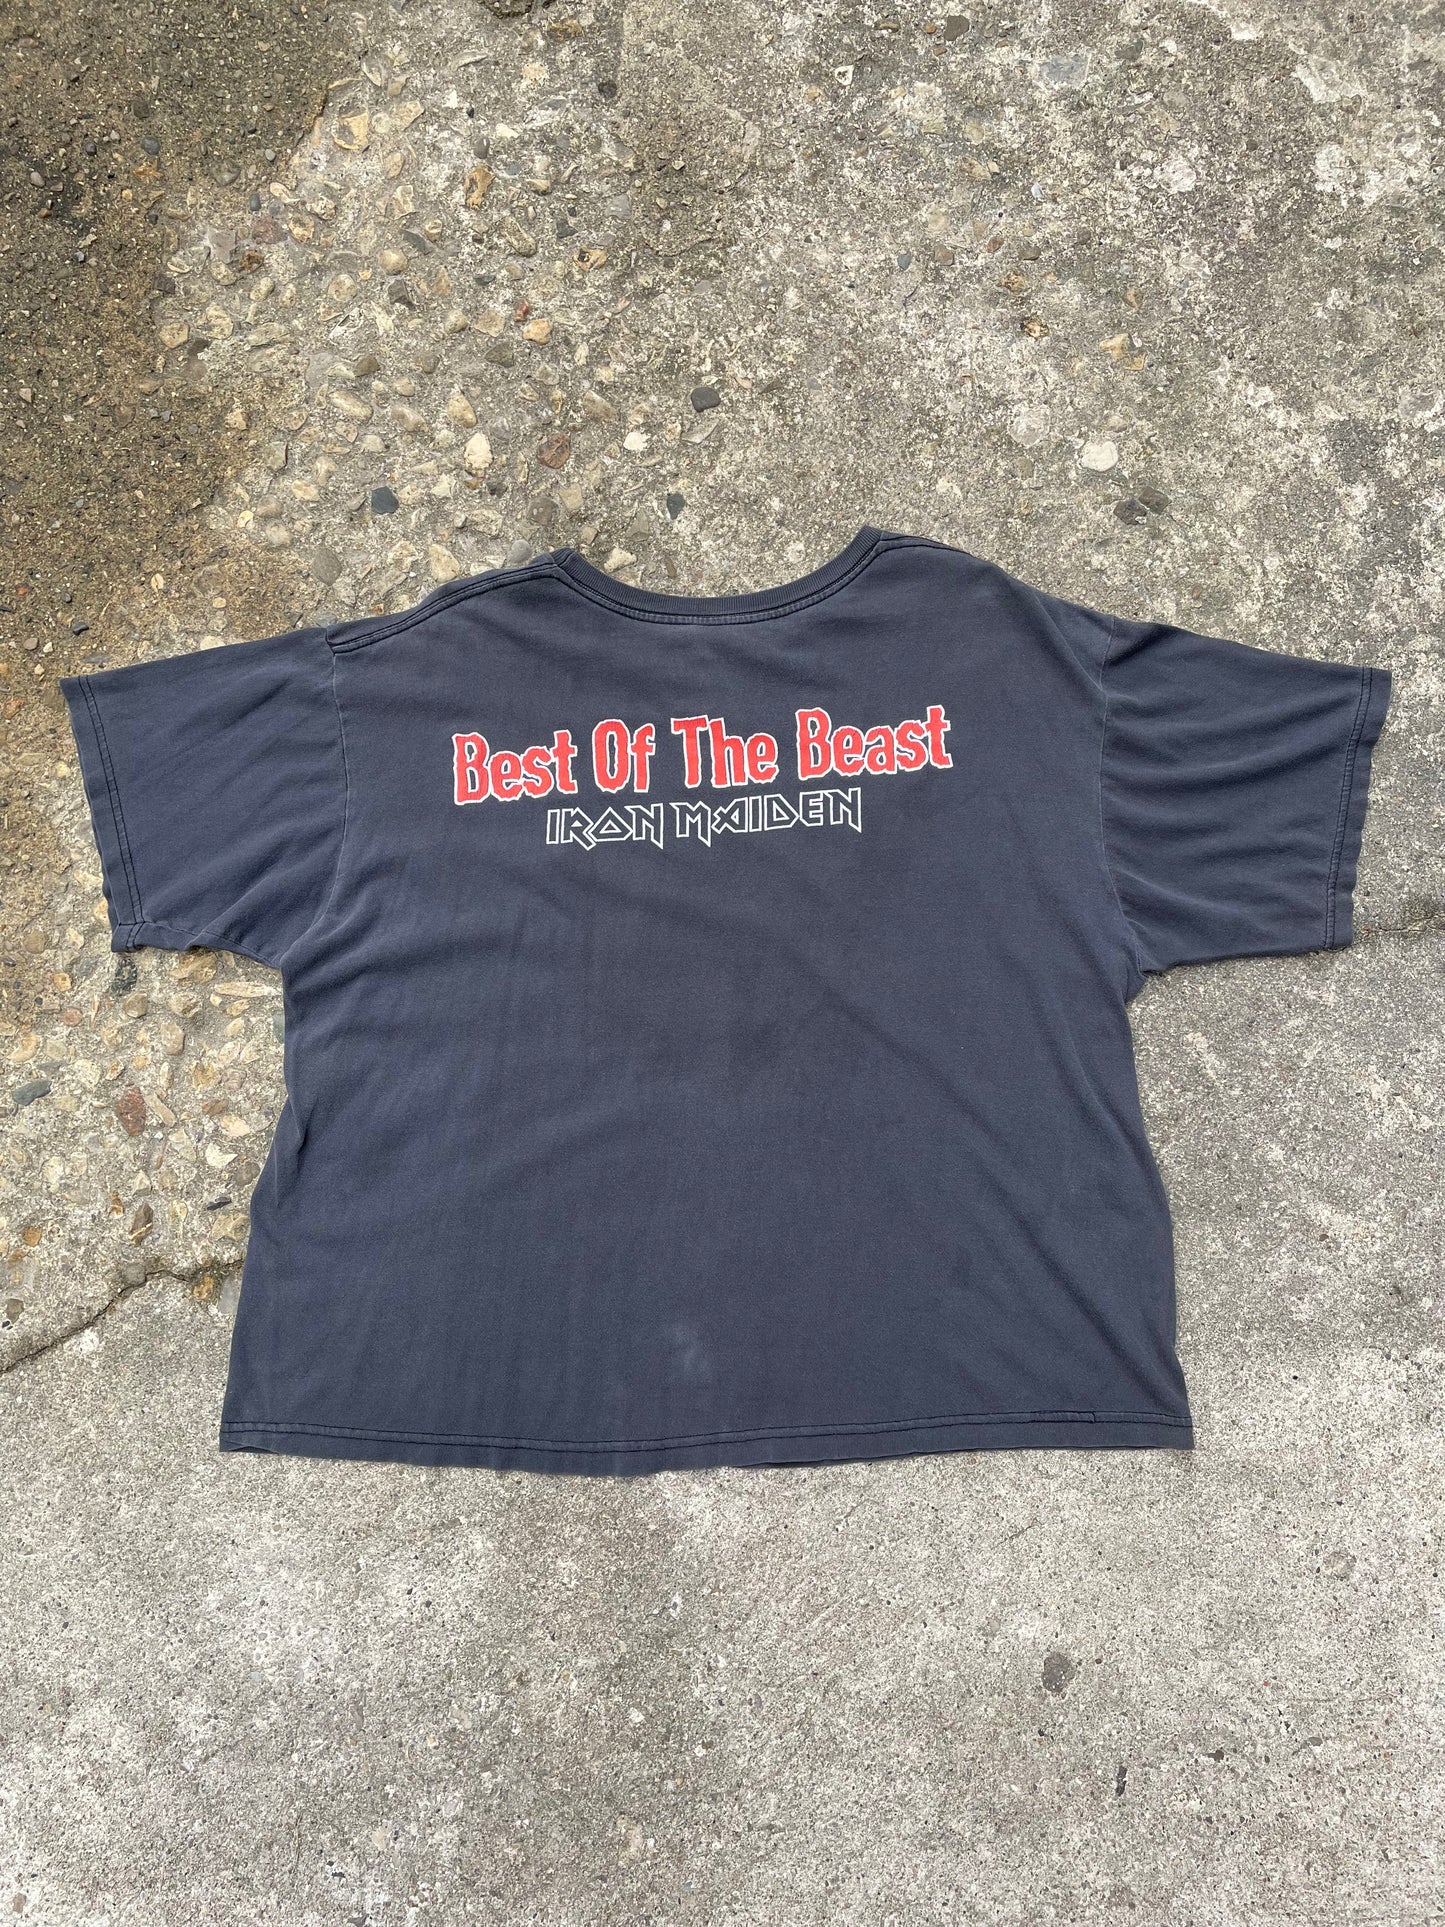 1997 Iron Maiden 'Best of the Beast' Band T-Shirt - L